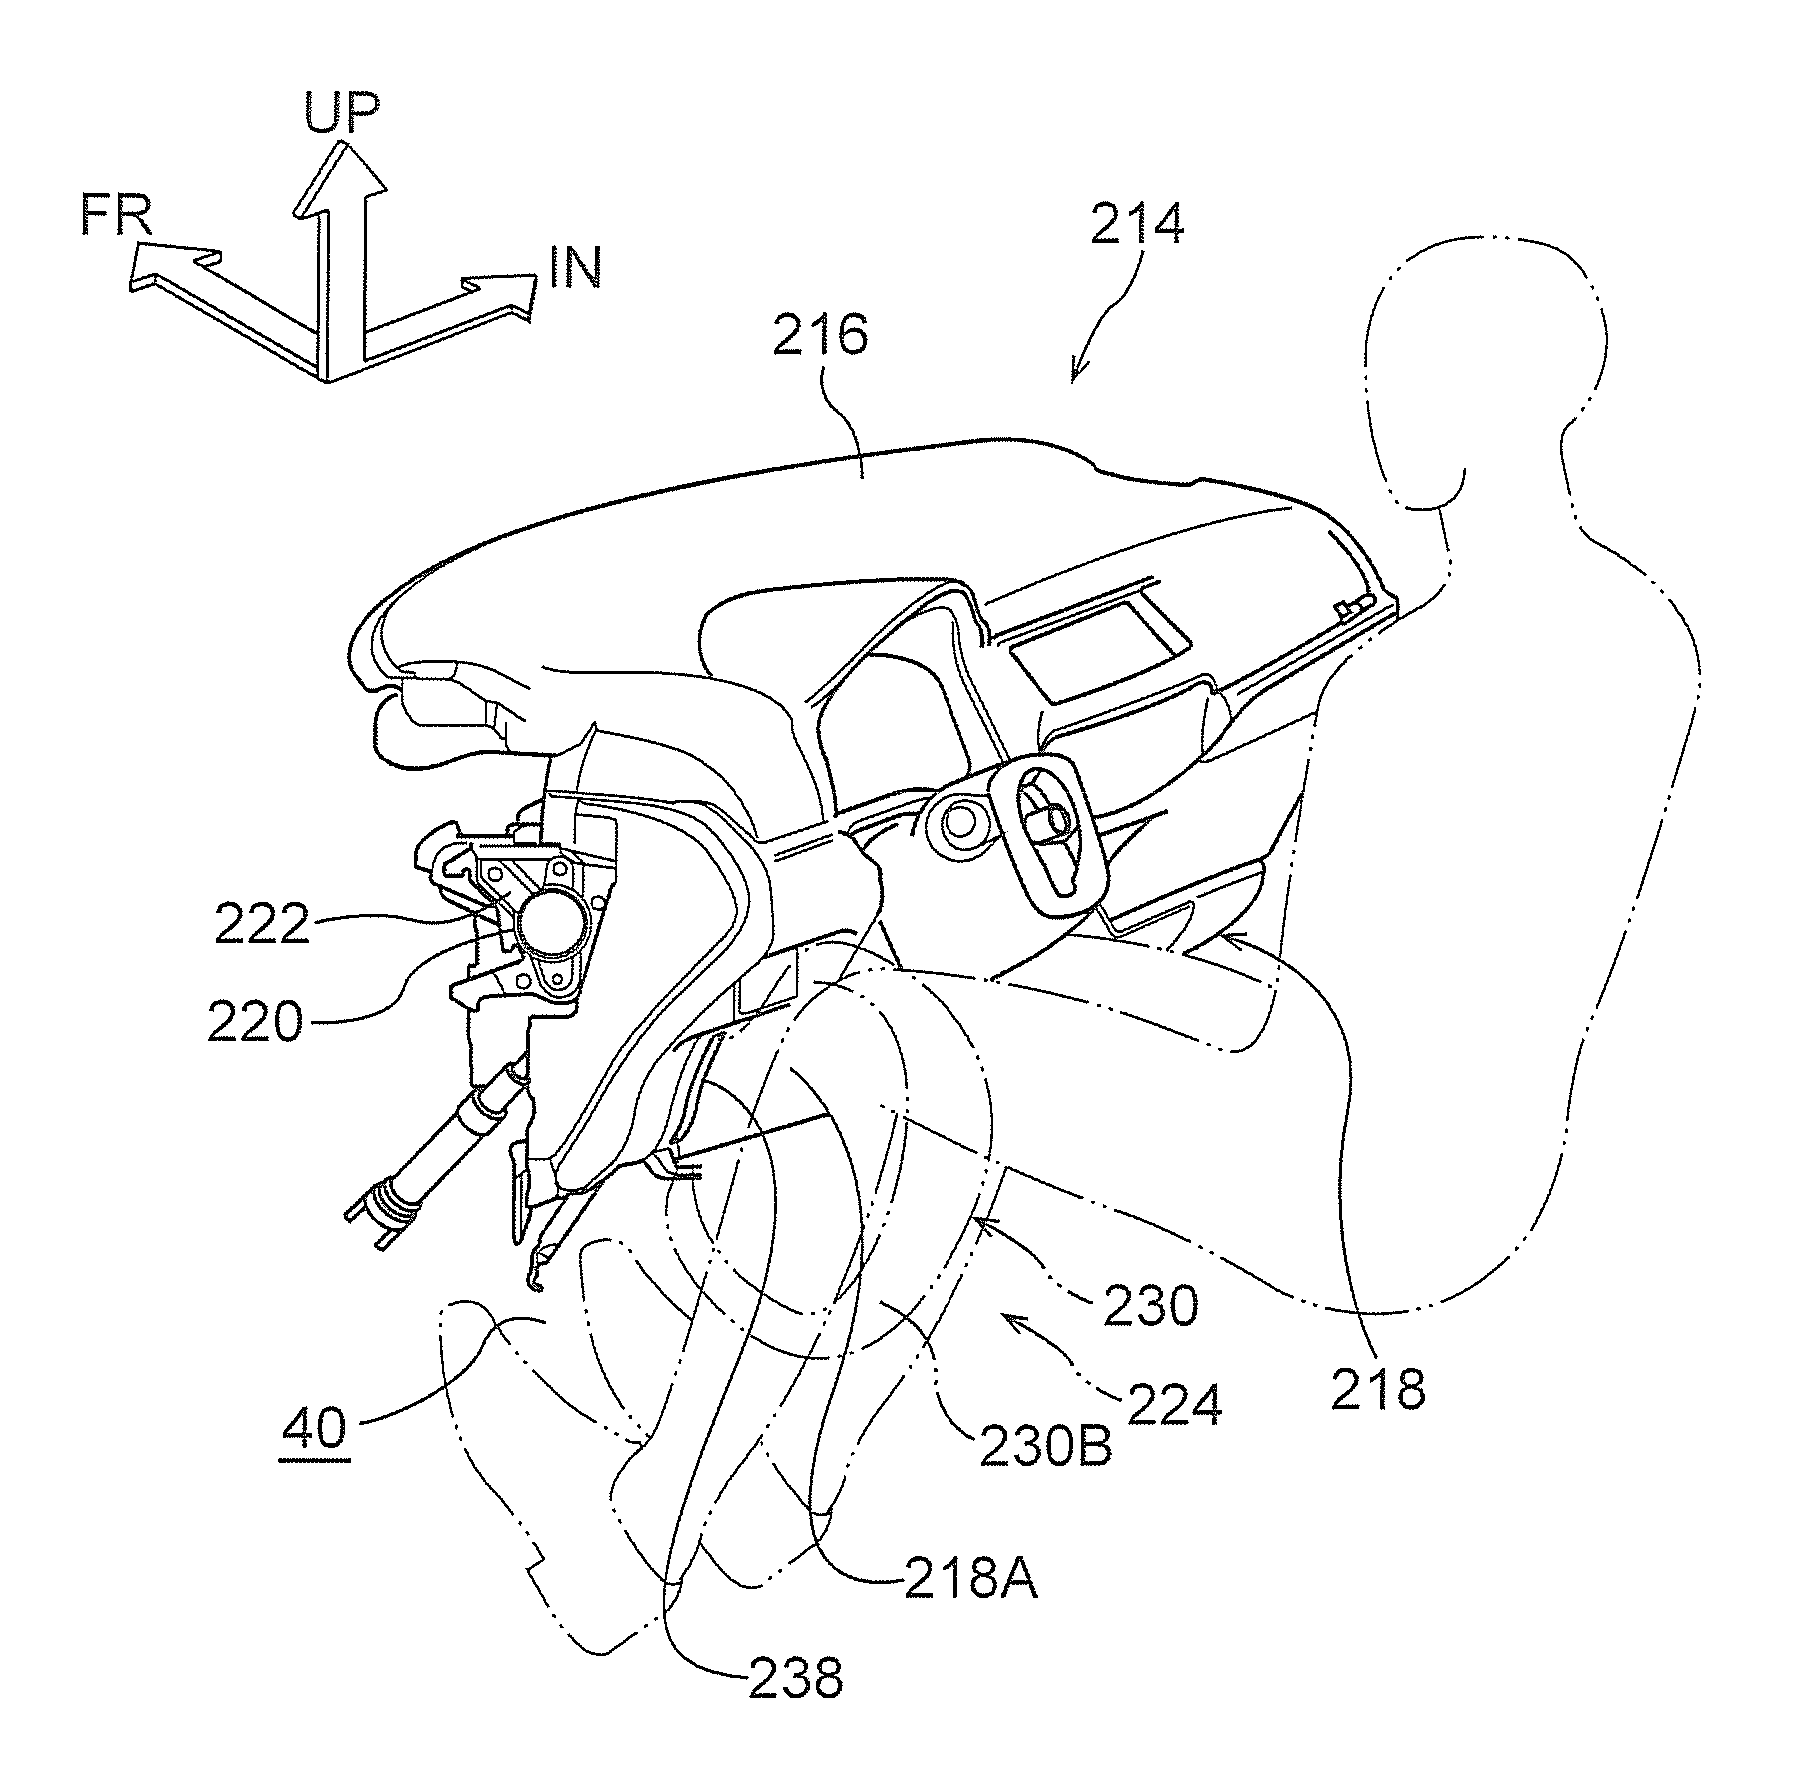 Knee side face restraint airbag device